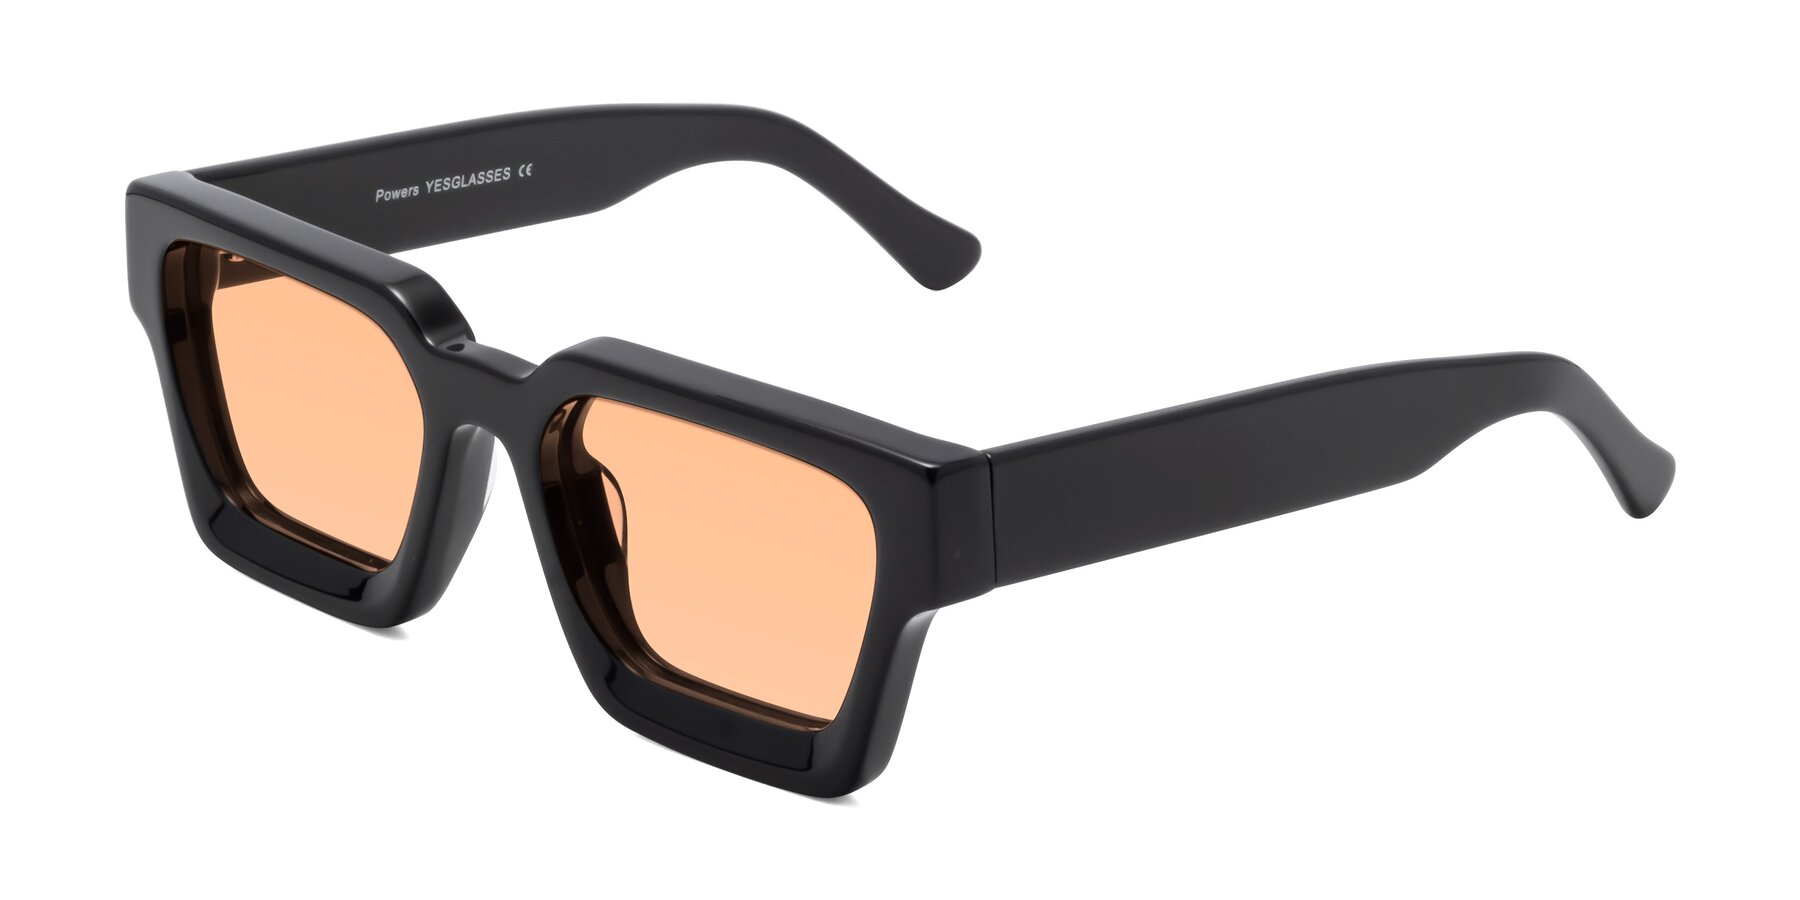 Angle of Powers in Black with Light Orange Tinted Lenses